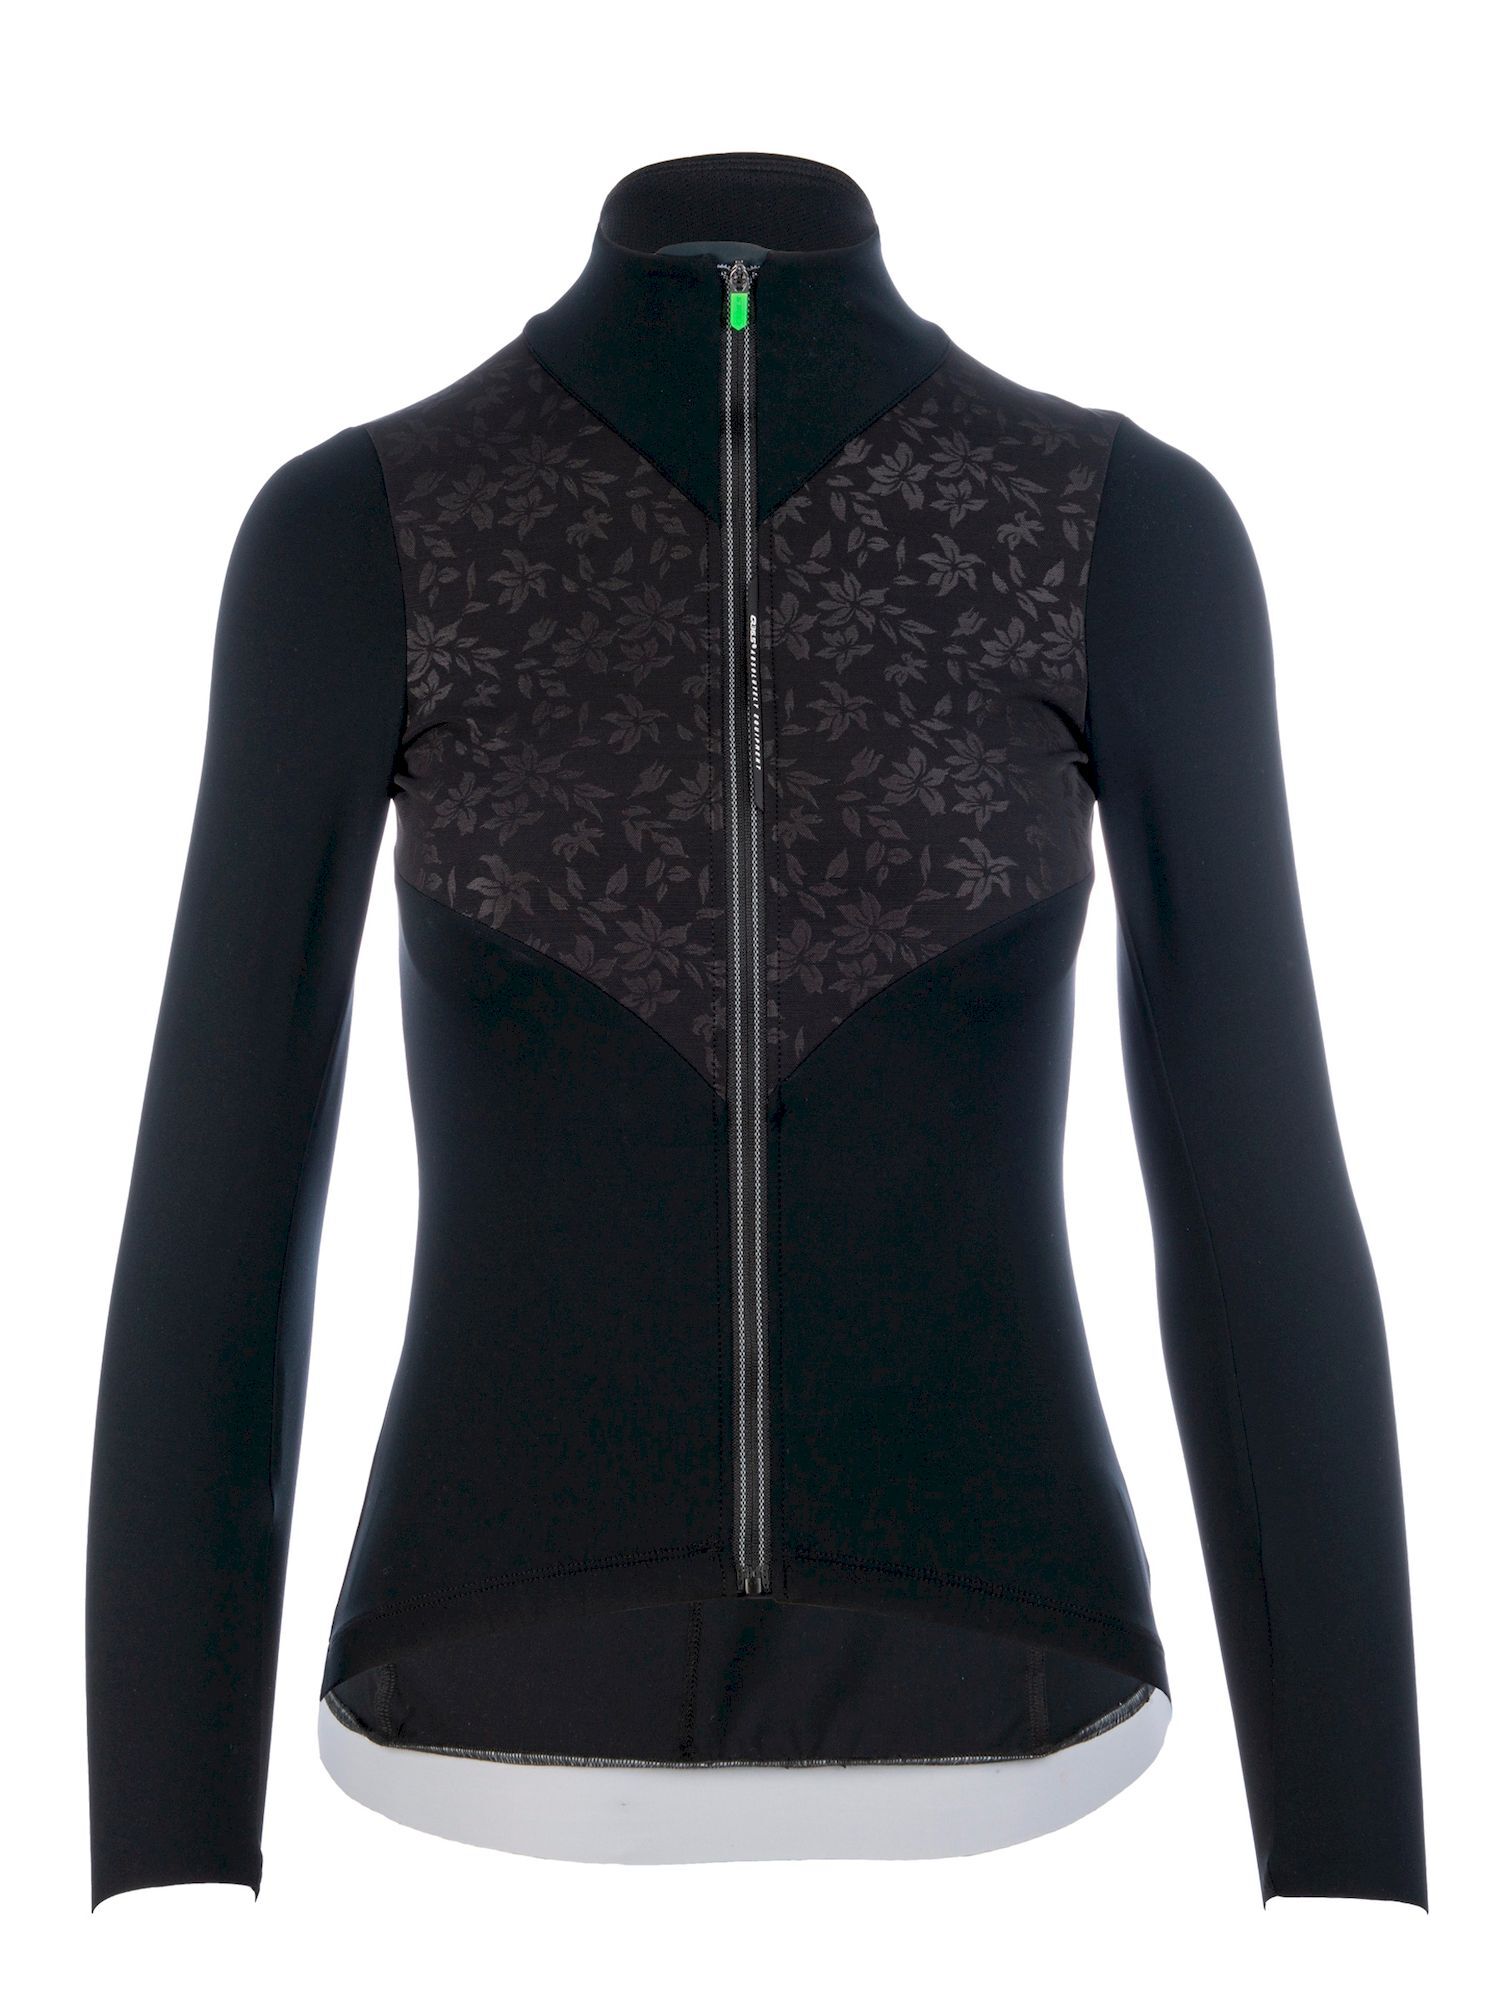 Q36.5 Jersey Long Sleeve Woman - Maglia ciclismo - Donna | Hardloop